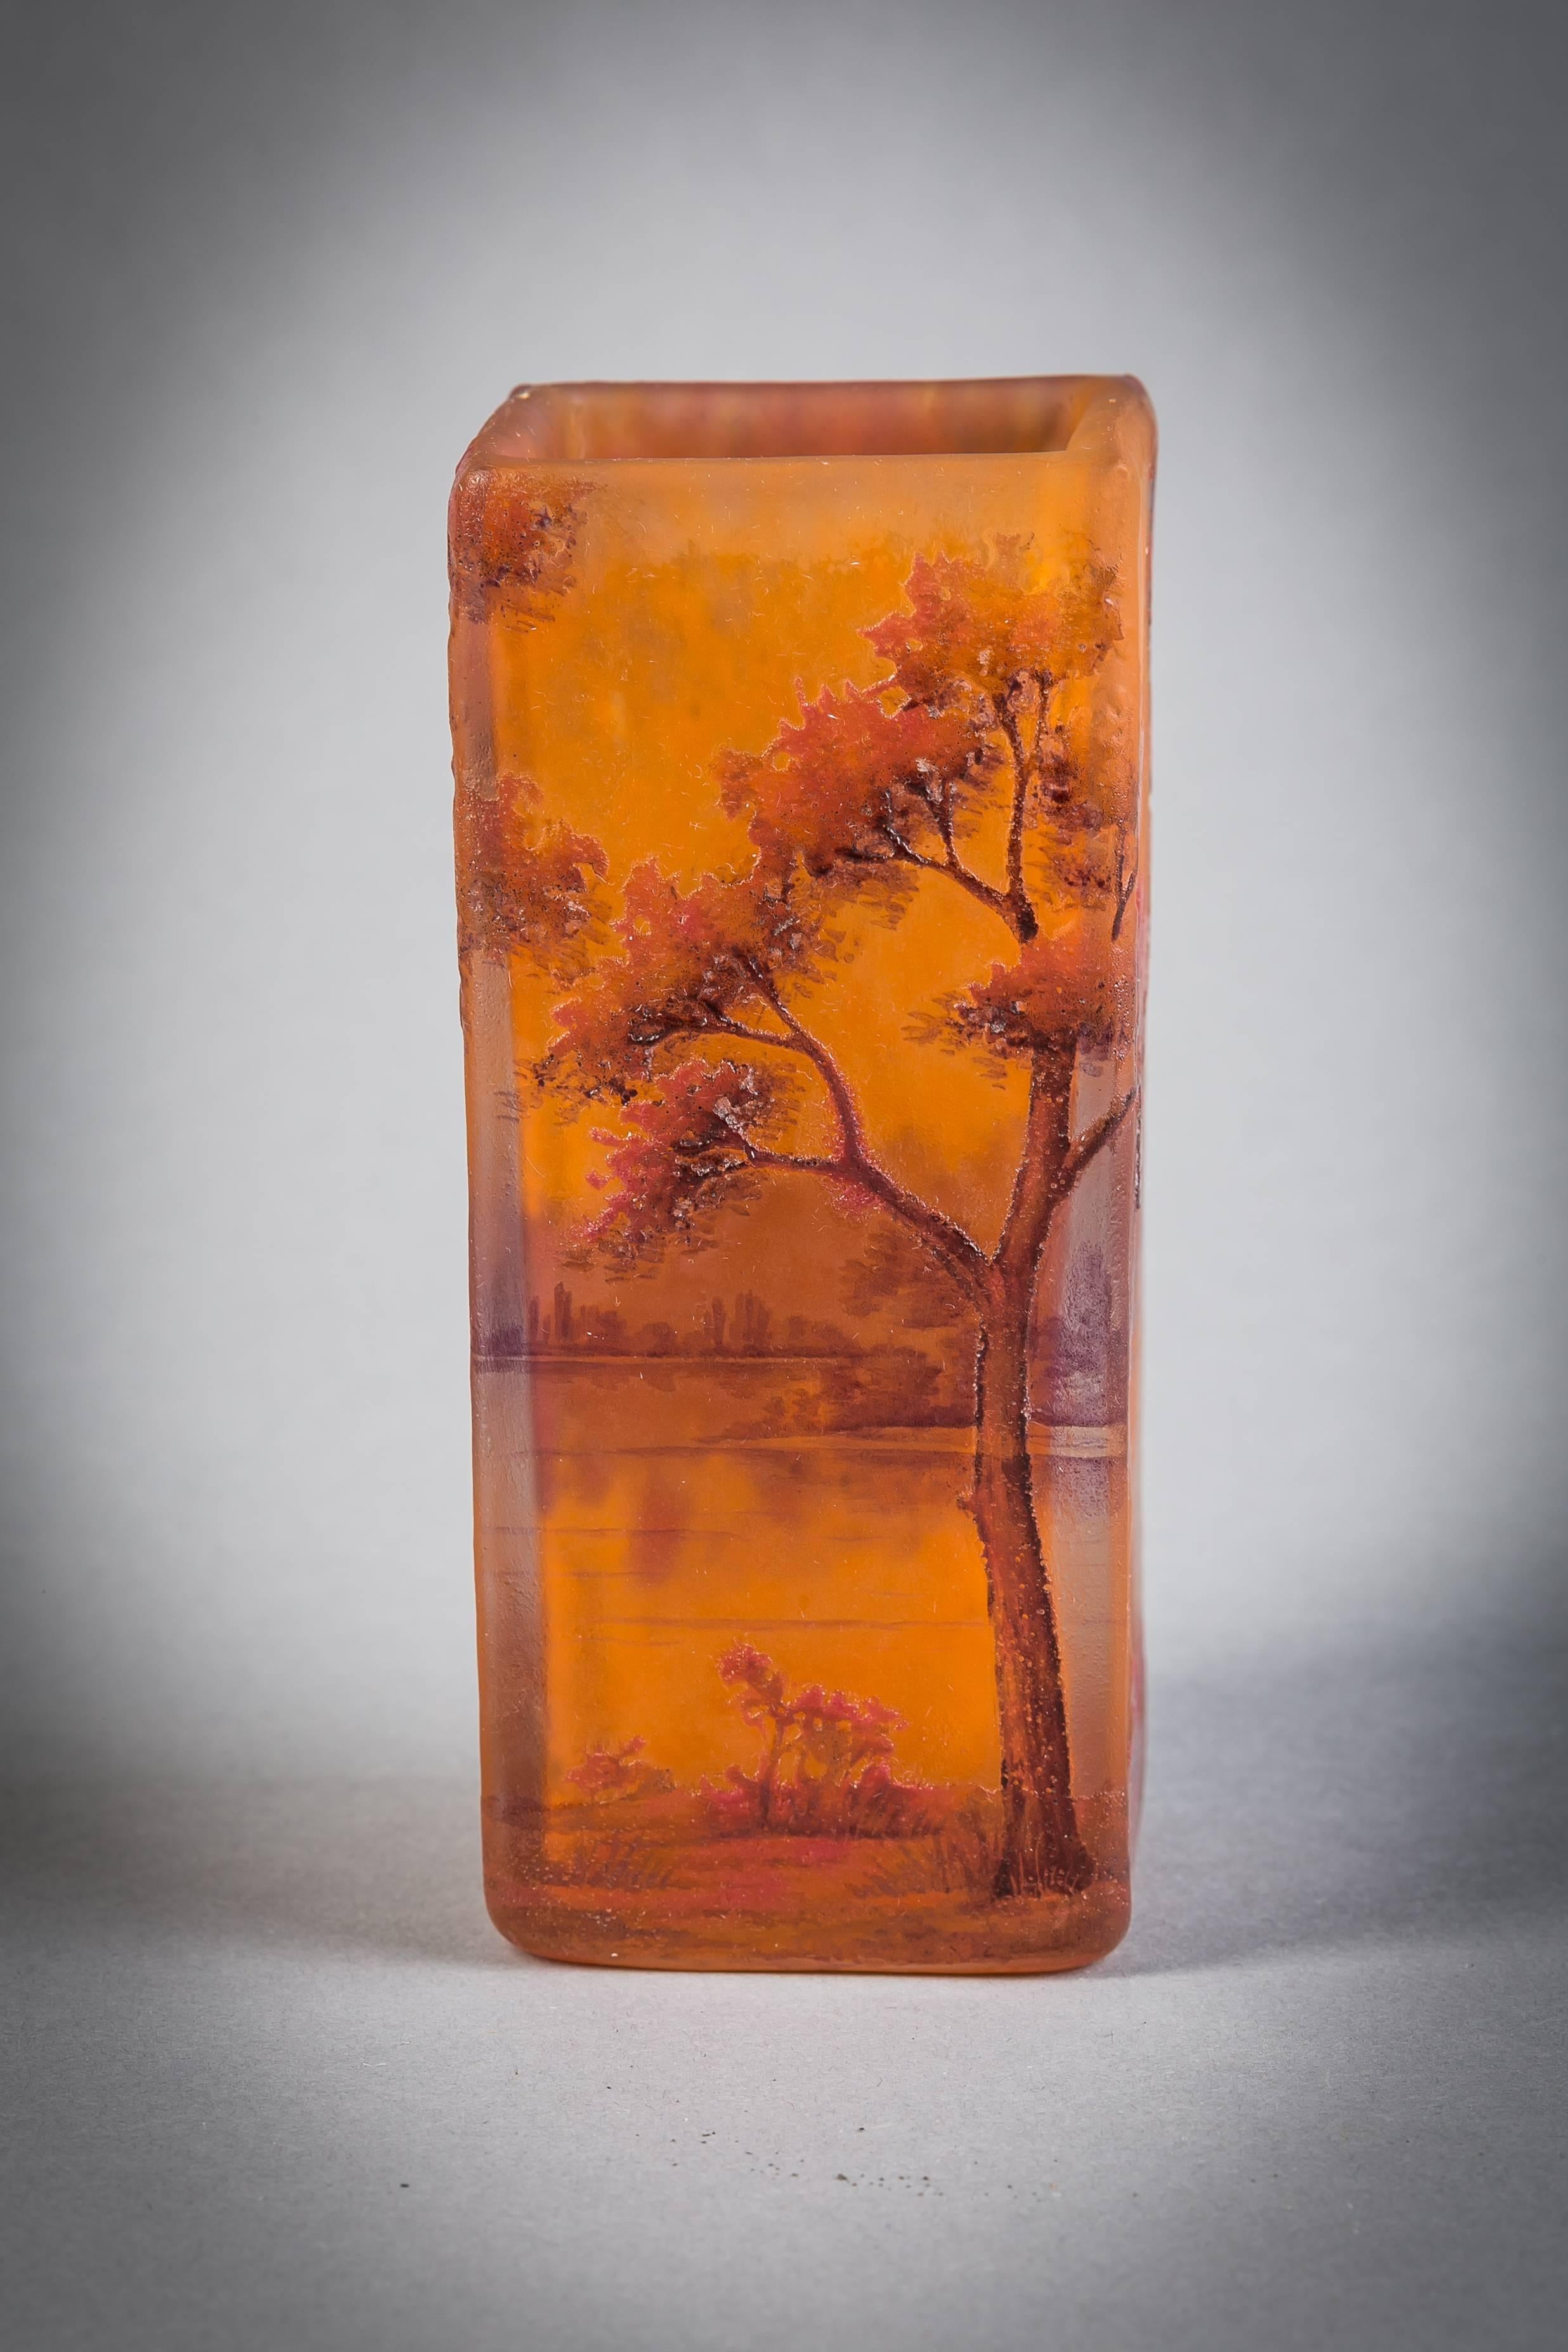 Cameo riverscape vase. Signed Daum Nacy with the Cross of Lorraine.